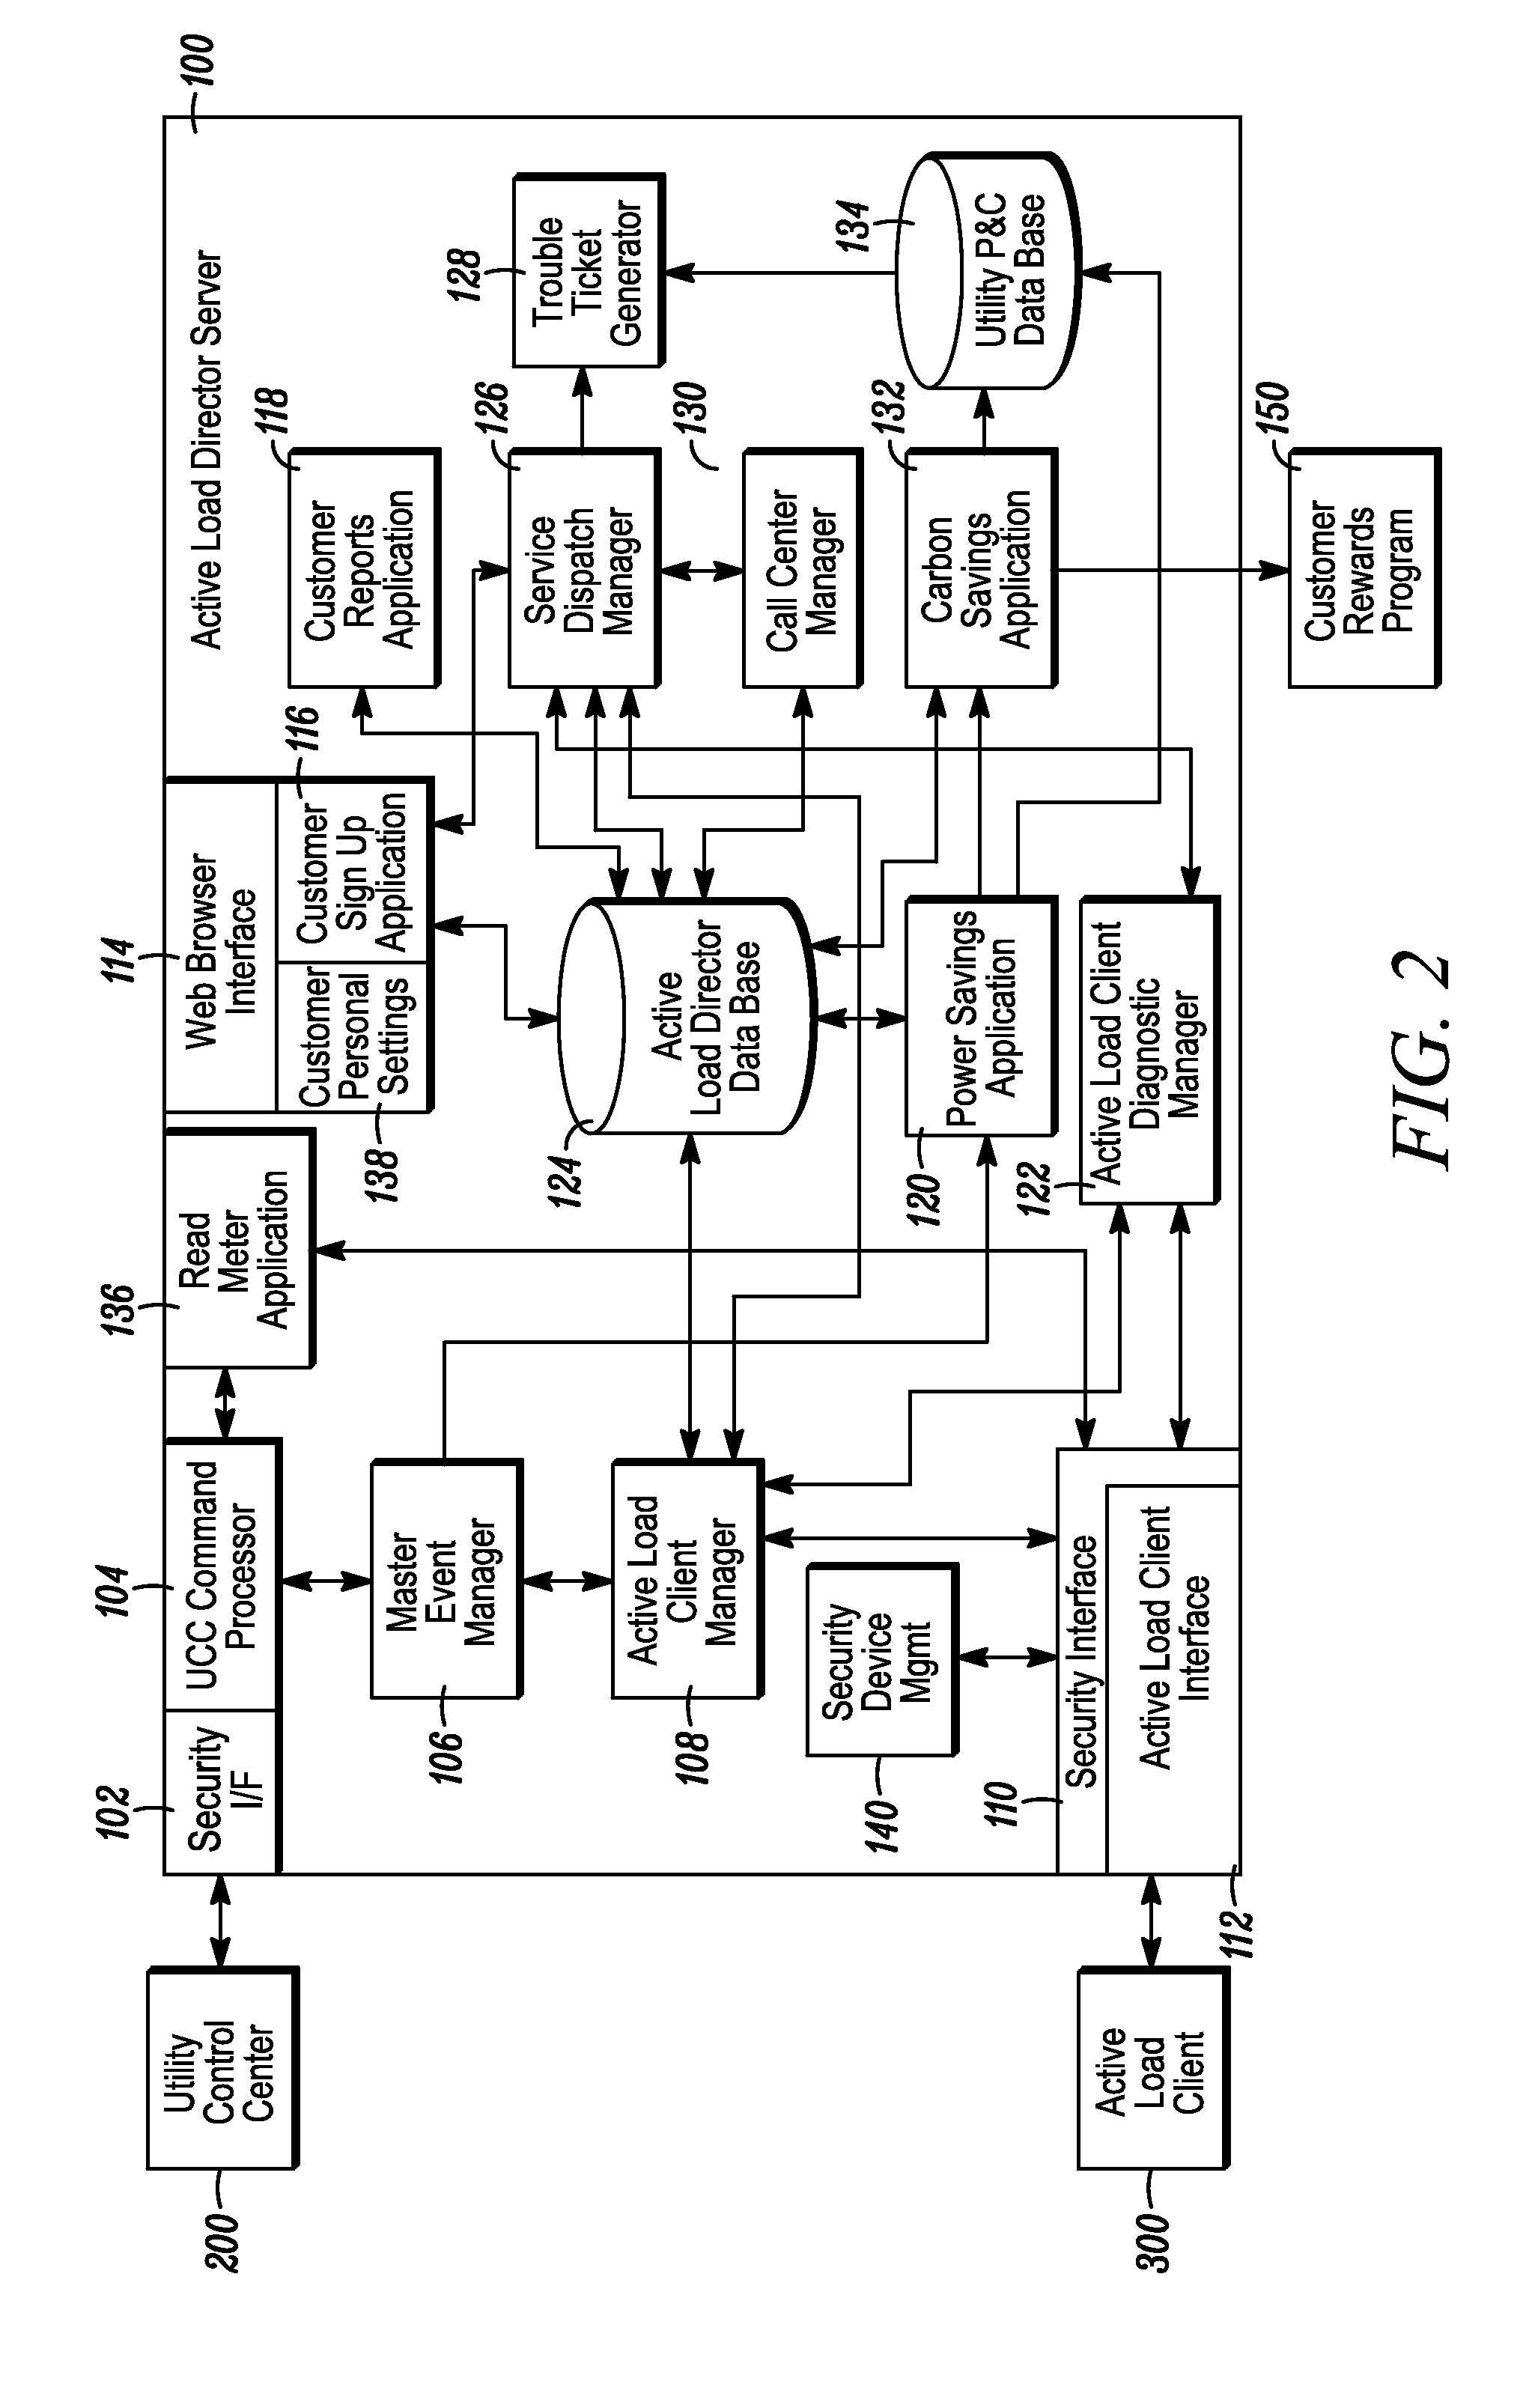 Method and apparatus for actively managing consumption of electric power supplied by an electric utility